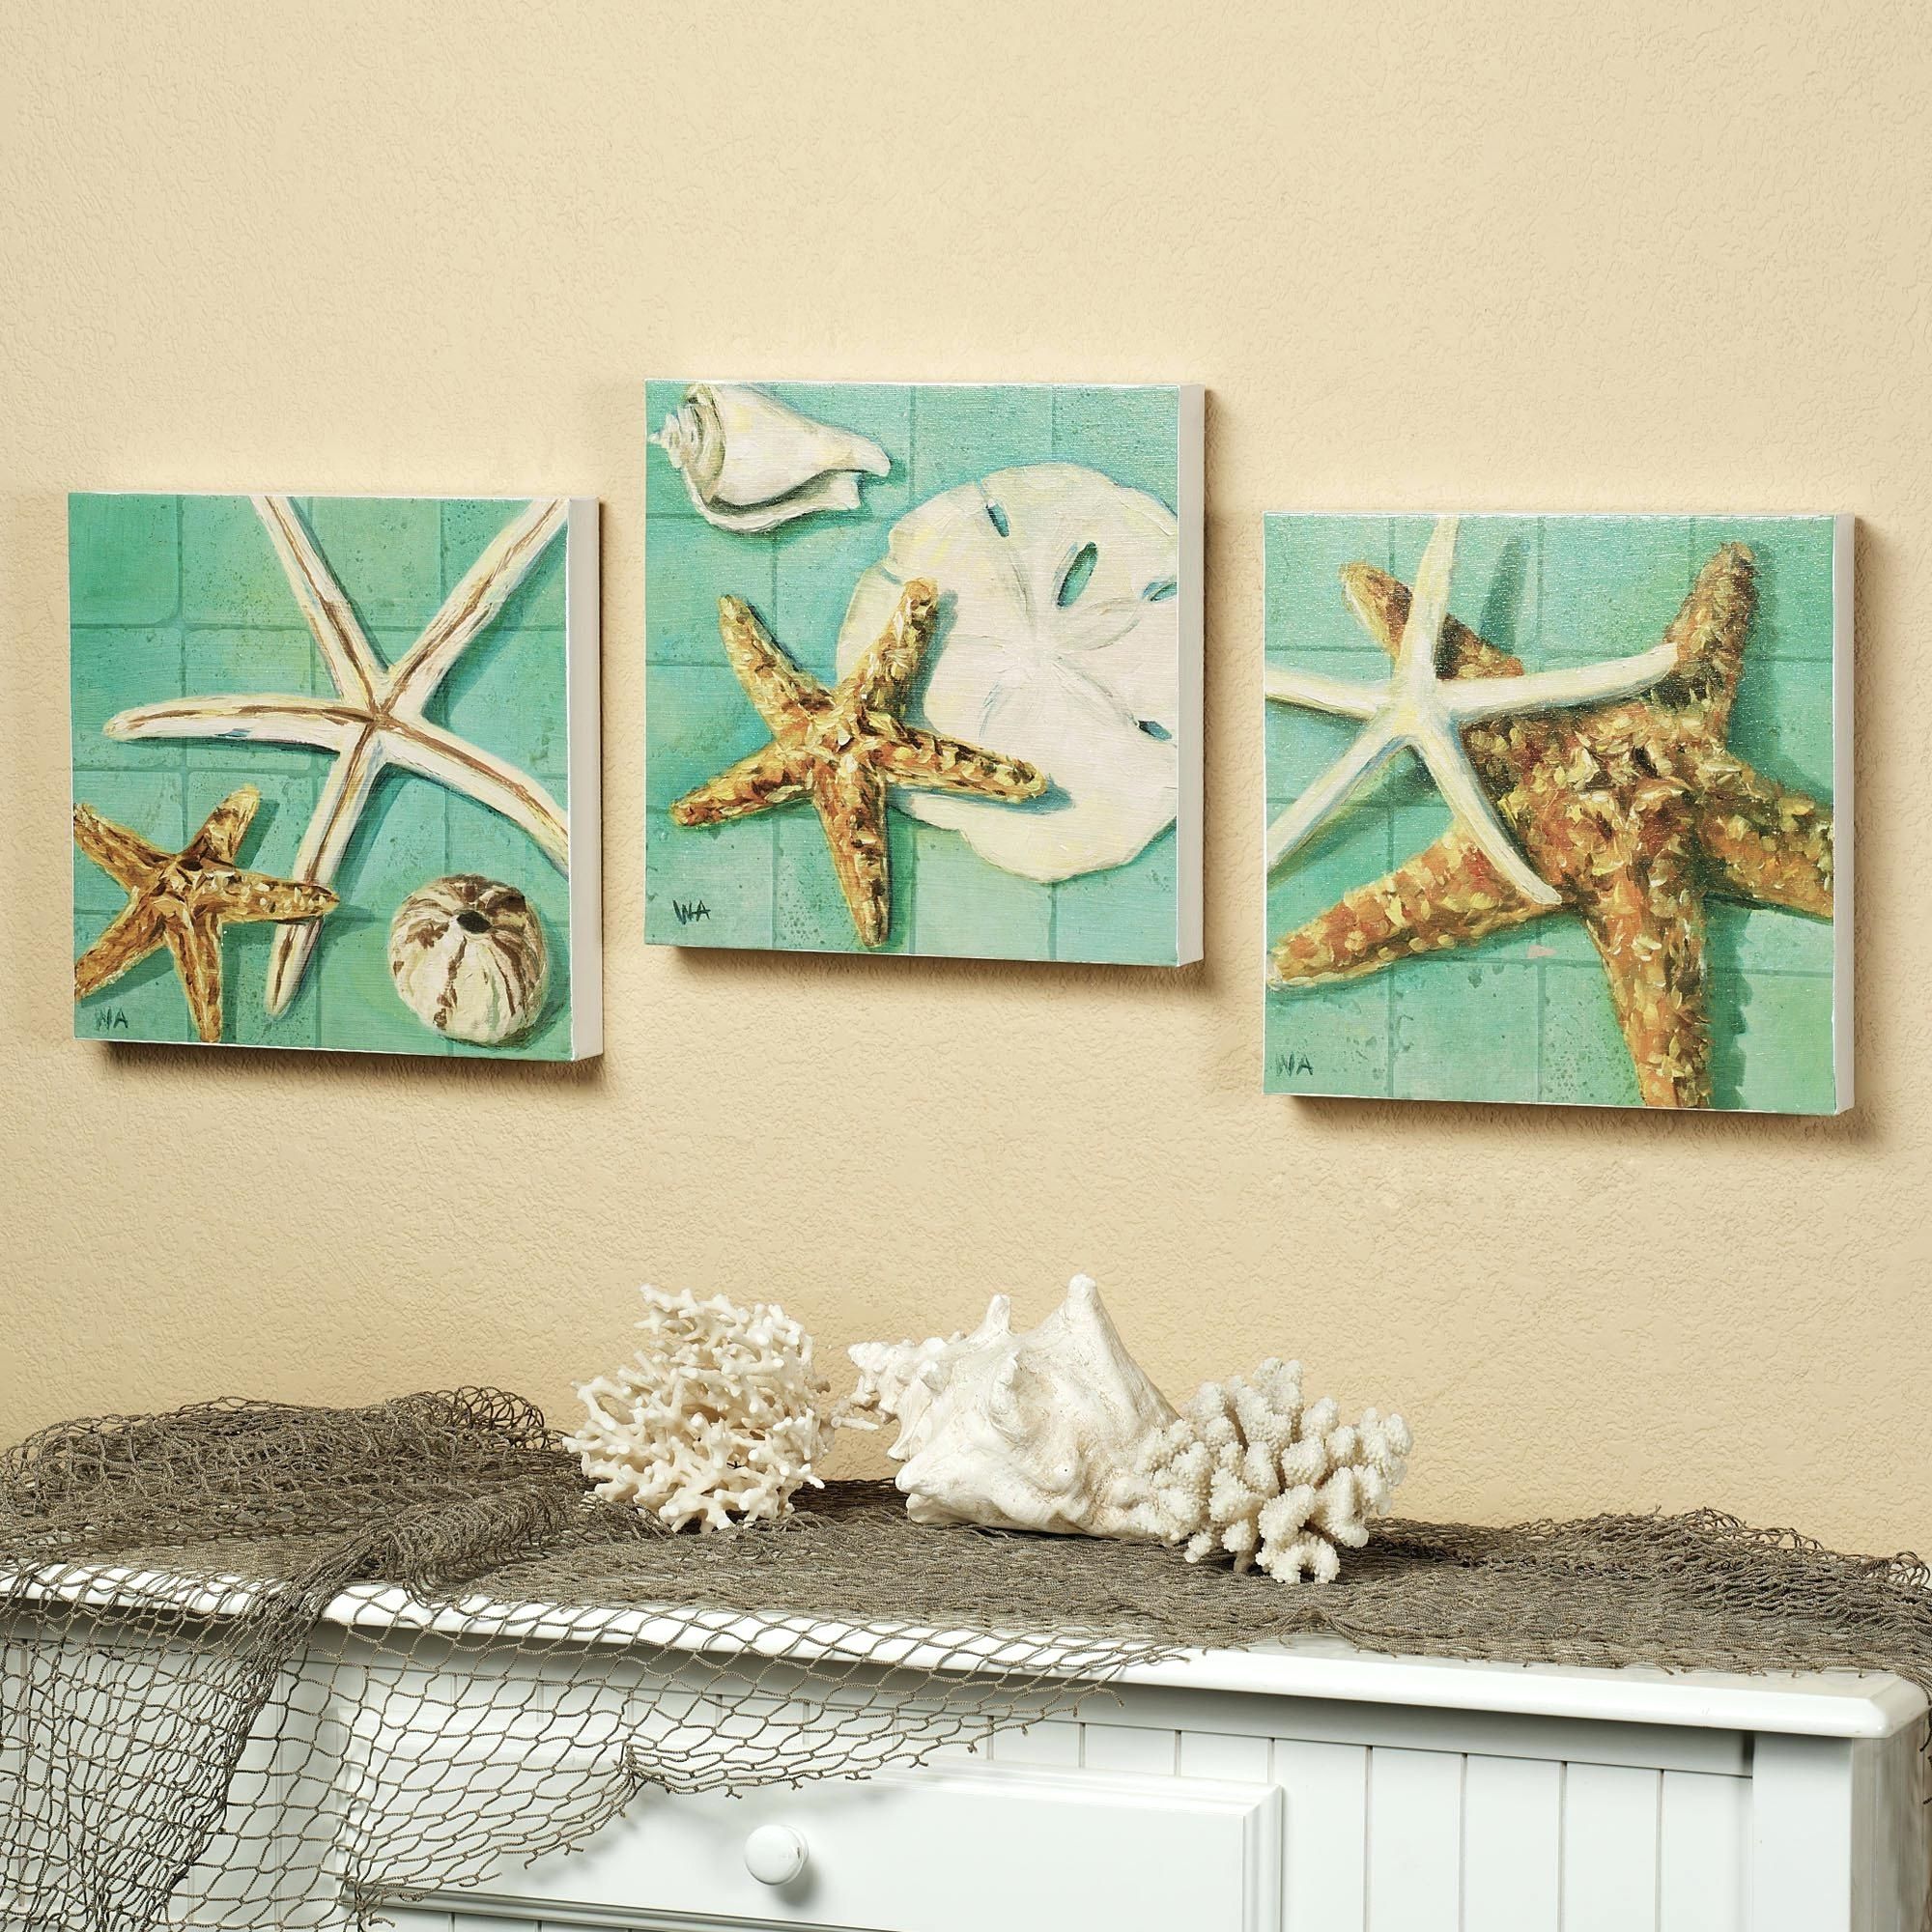 Well Liked Large White Starfish Wall Decor • Walls Decor Intended For Large Starfish Wall Decors (View 4 of 15)